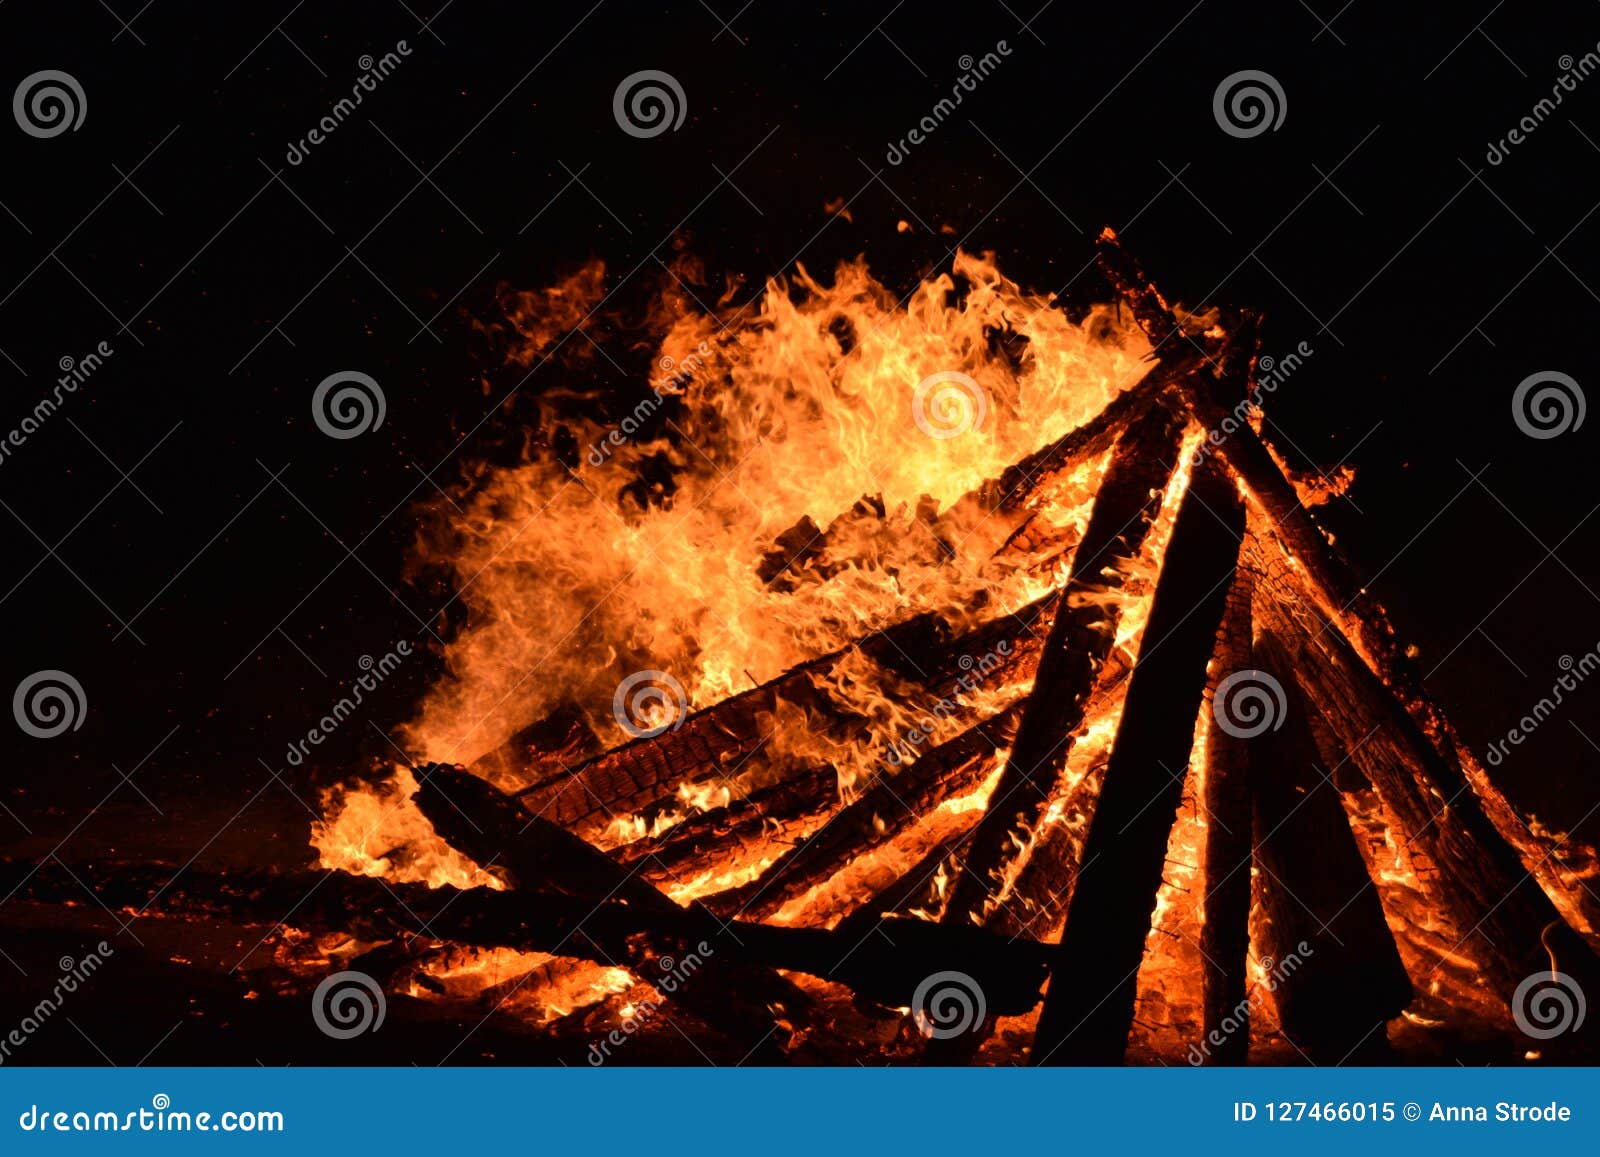 The Battle Of Sun Firewood On Baltic Unity Day Stock Image